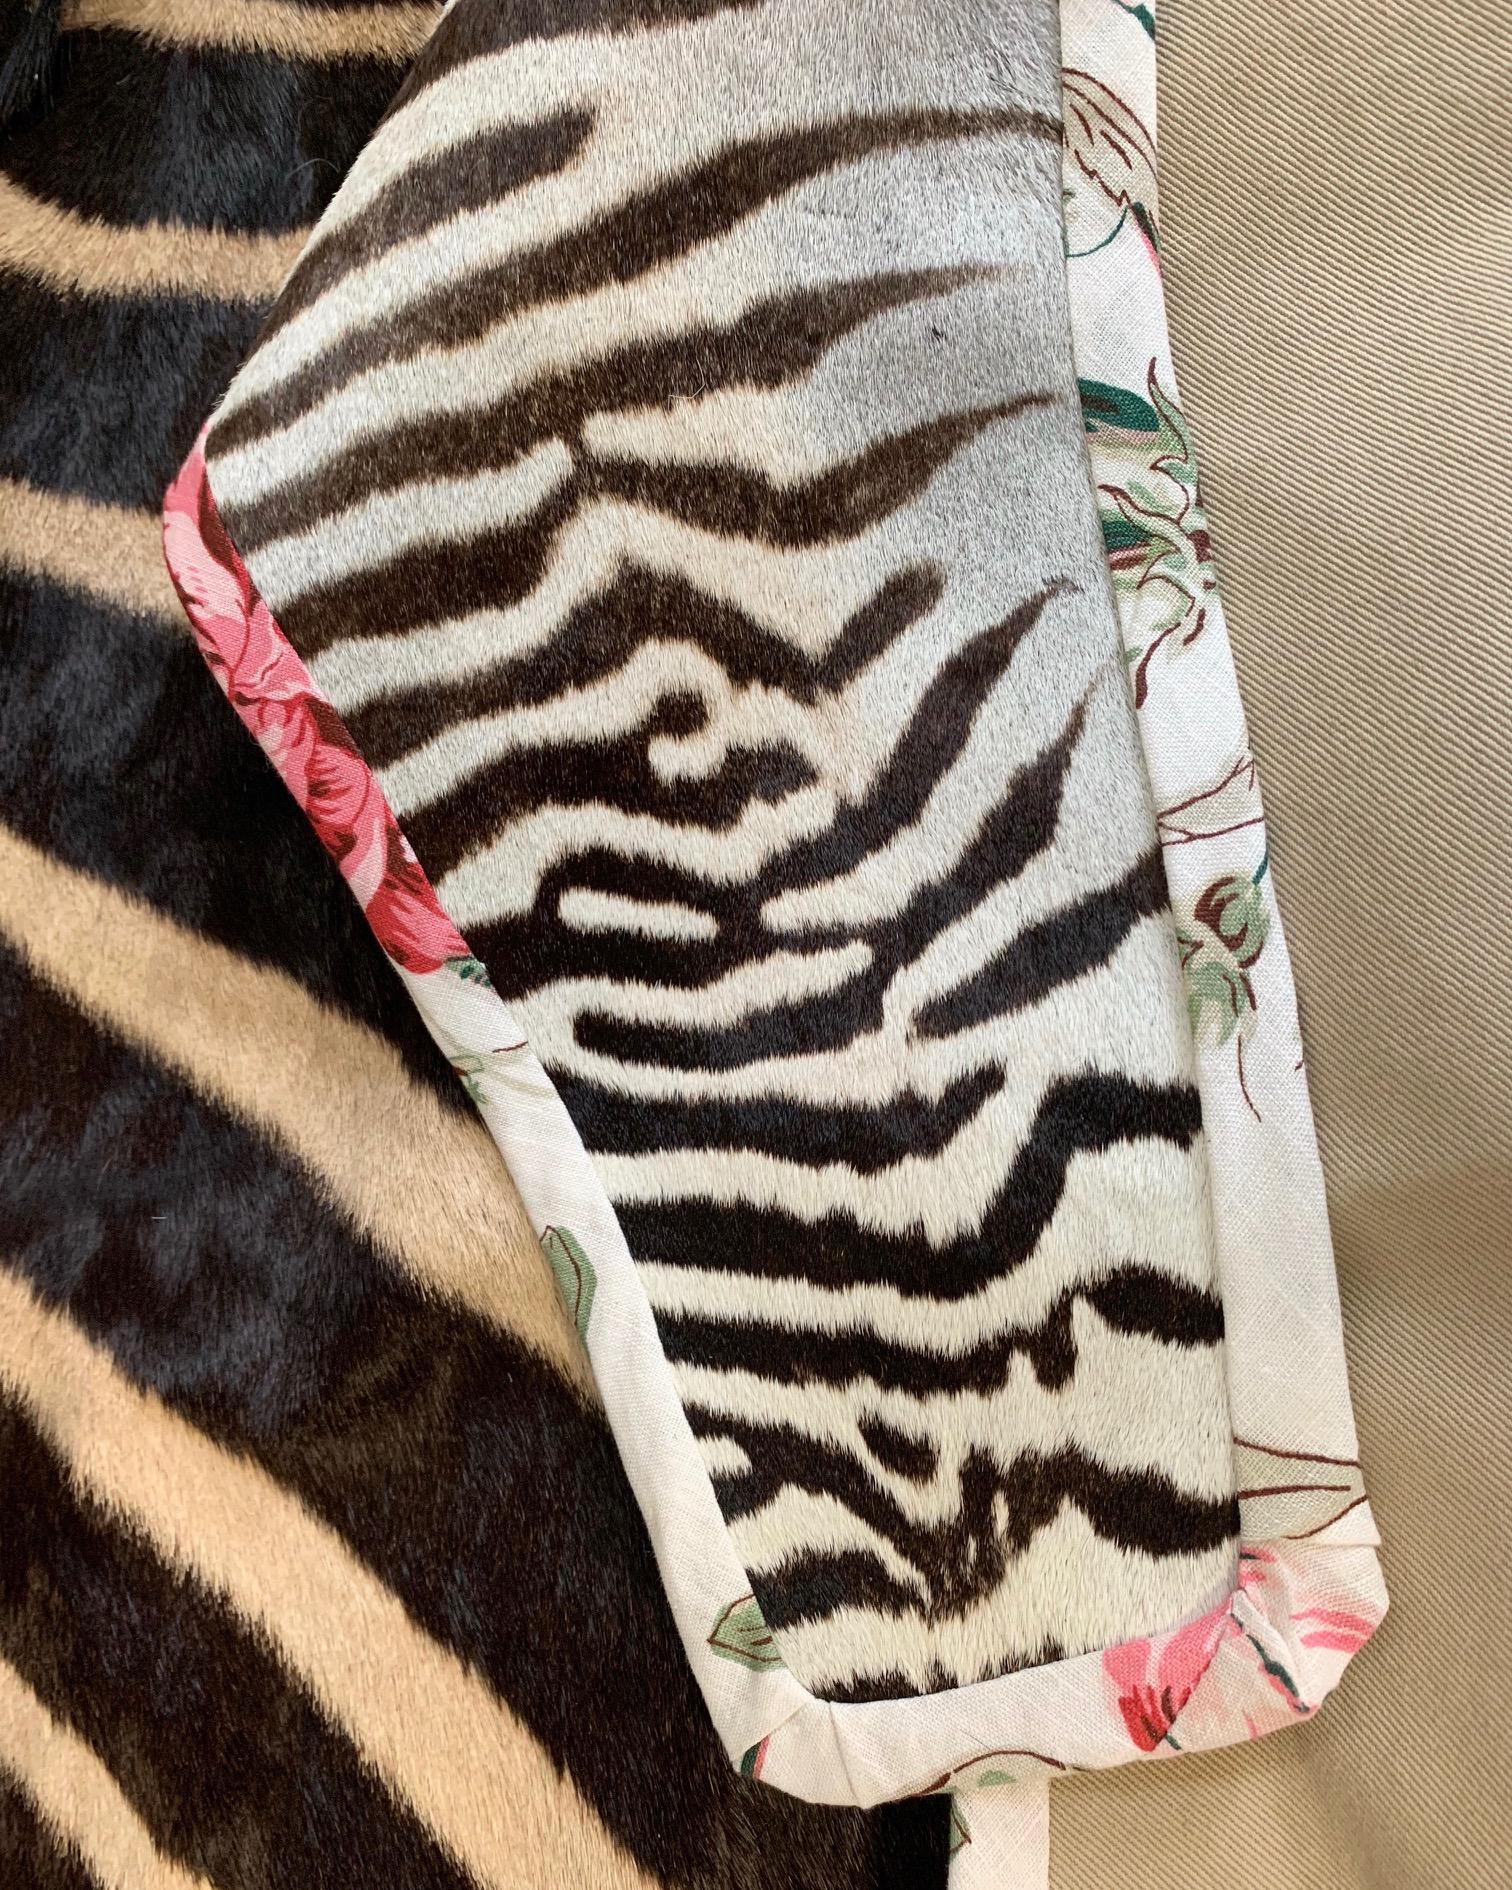 Zebra Hide Chaise Lounge in Schumacher Fabric with Zebra Rug For Sale